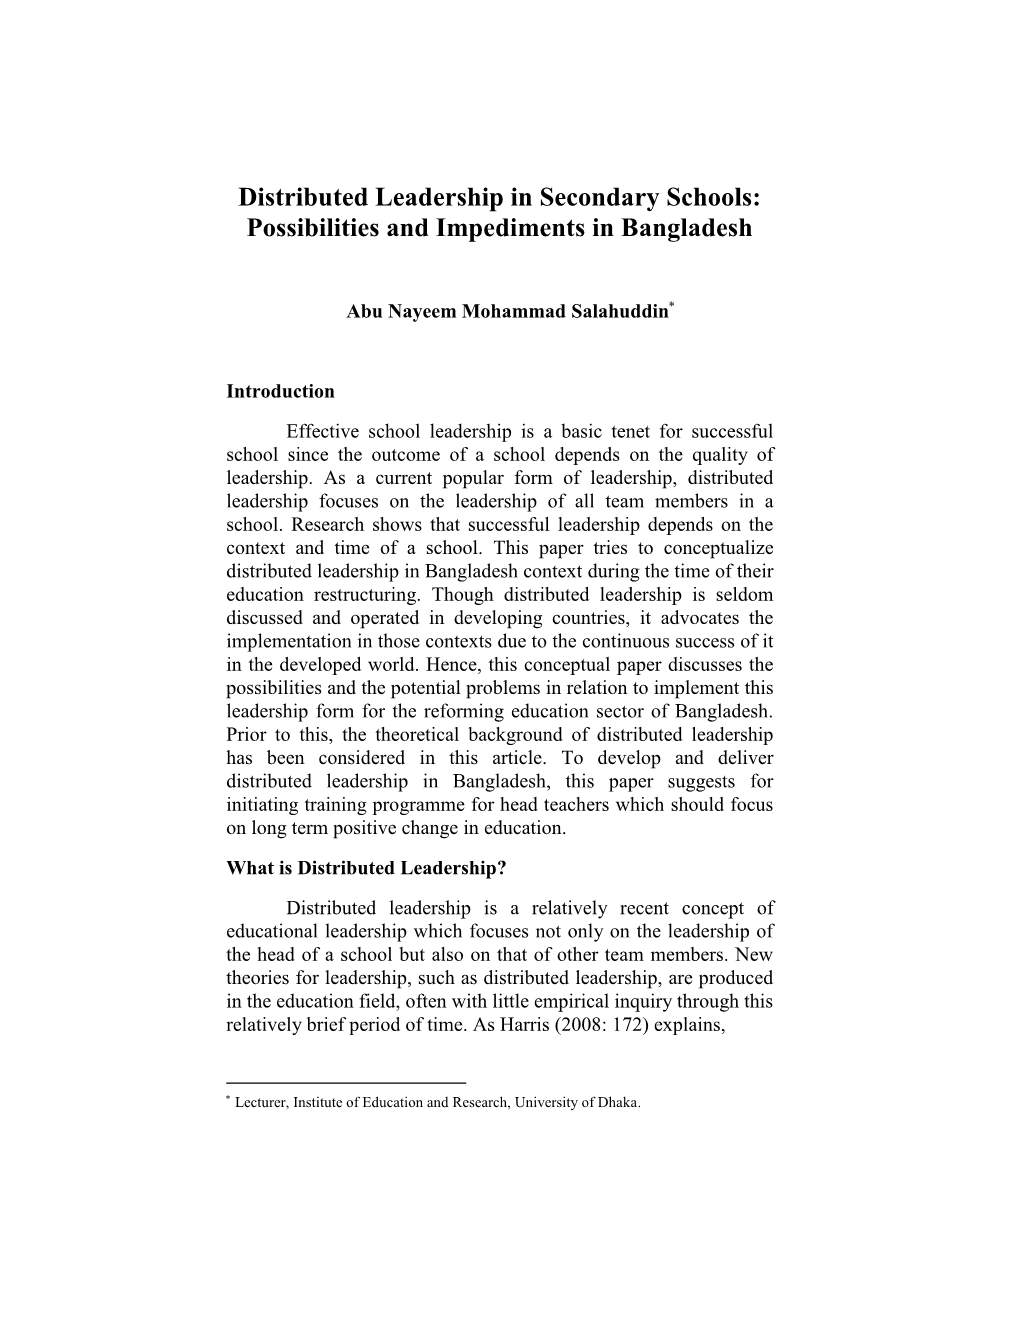 Distributed Leadership in Secondary Schools: Possibilities and Impediments in Bangladesh